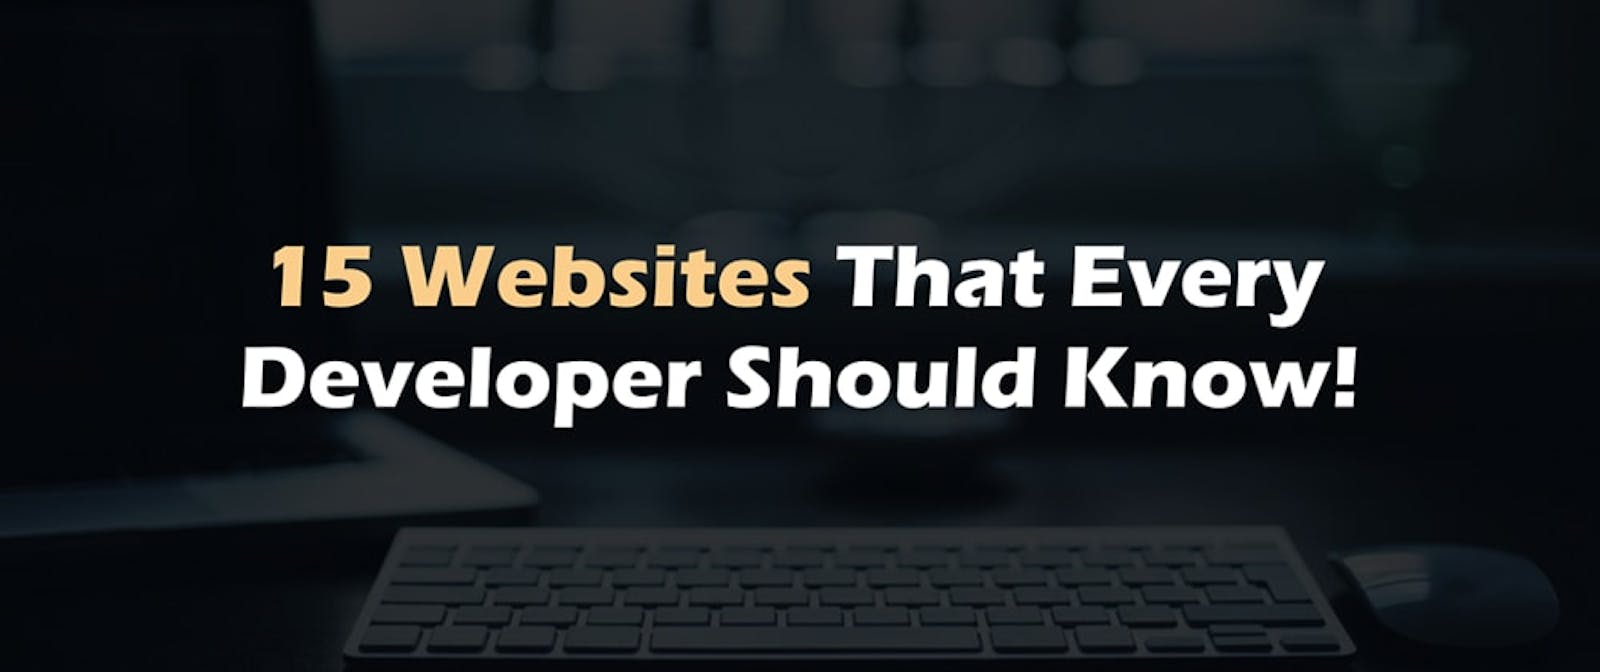 15 Websites That Every Developer Should Know!